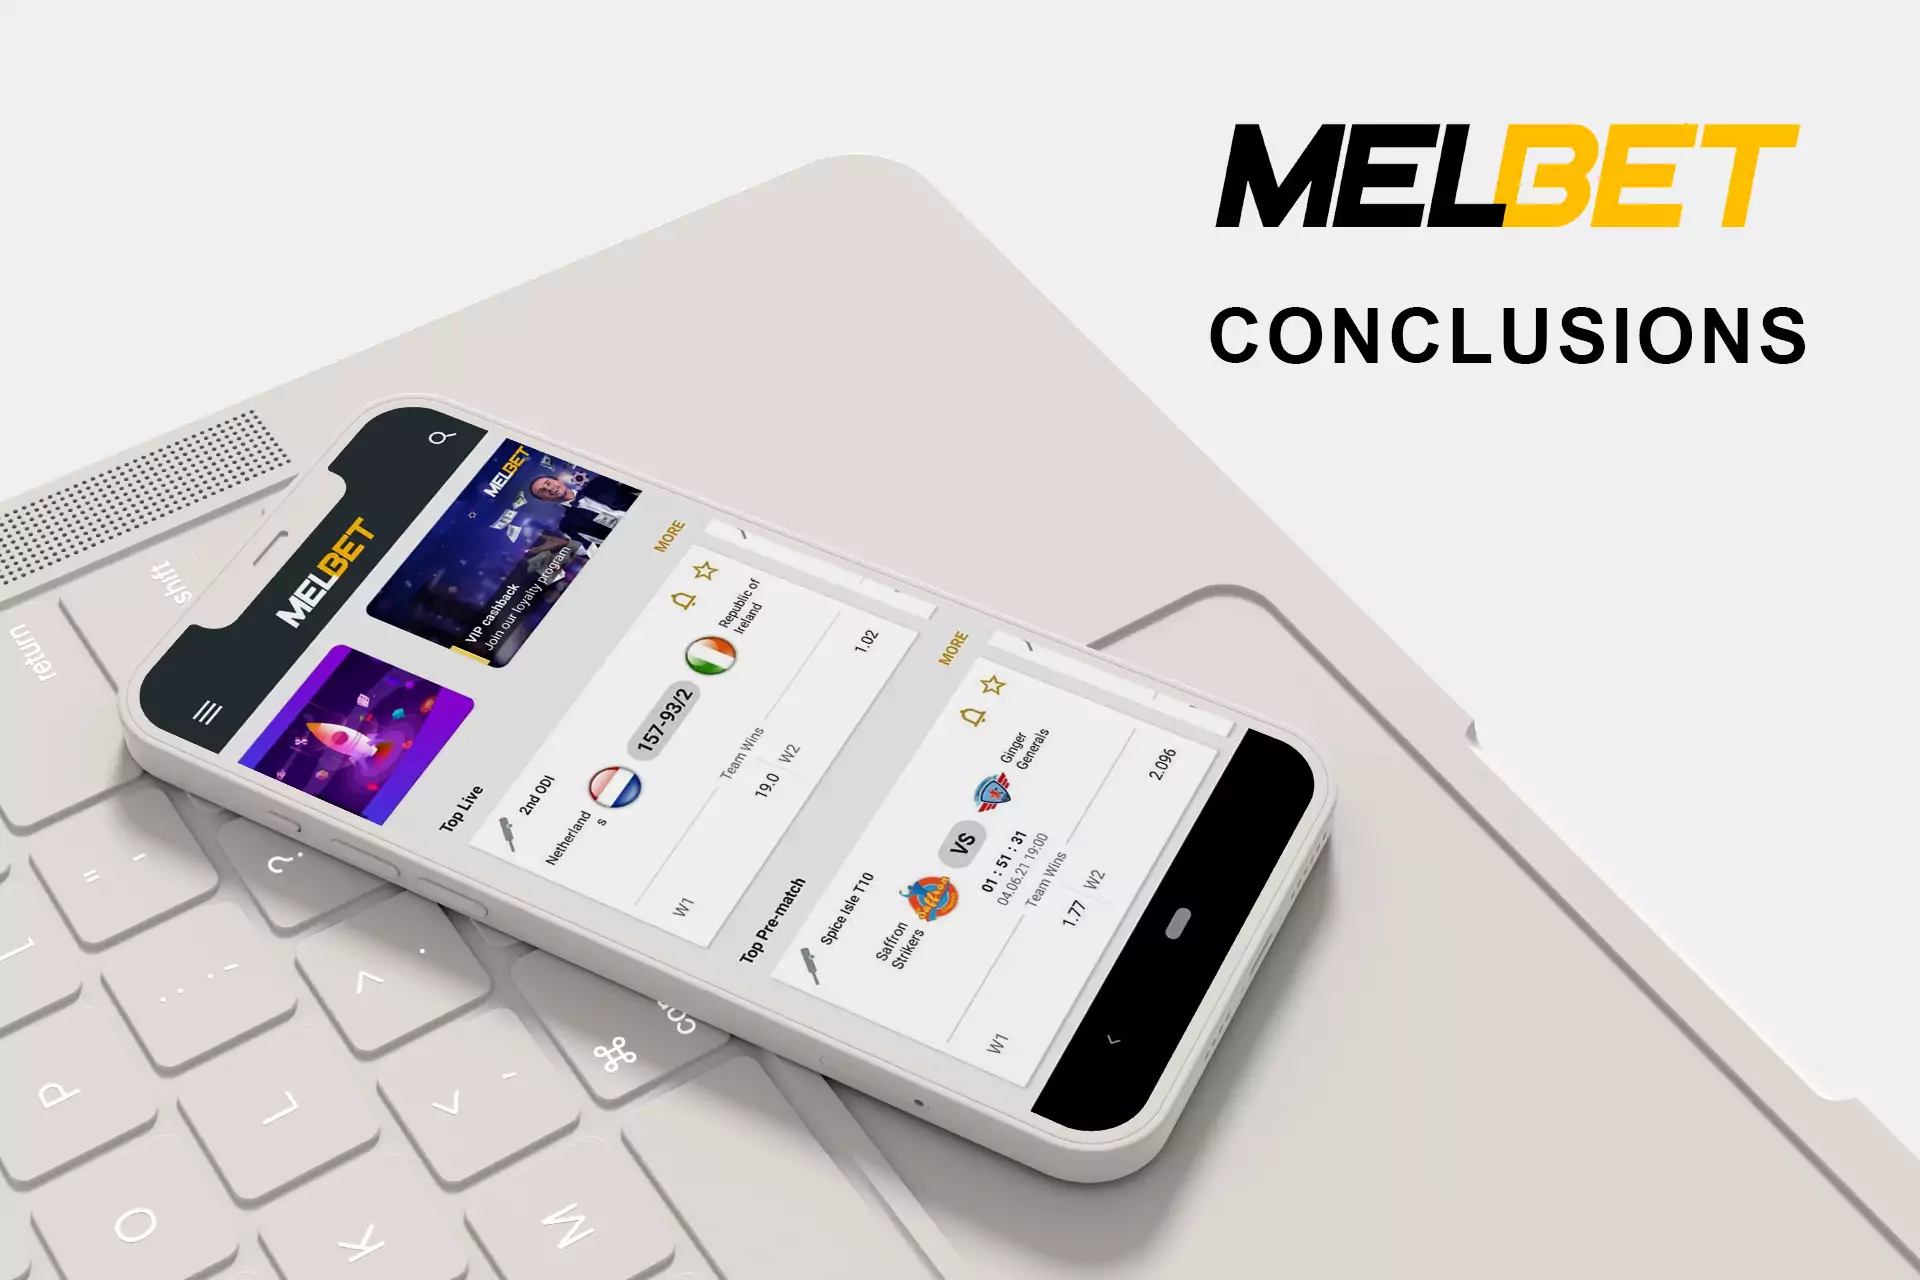 Read the conclusions about the quality of the Melbet app for Android and iOS.